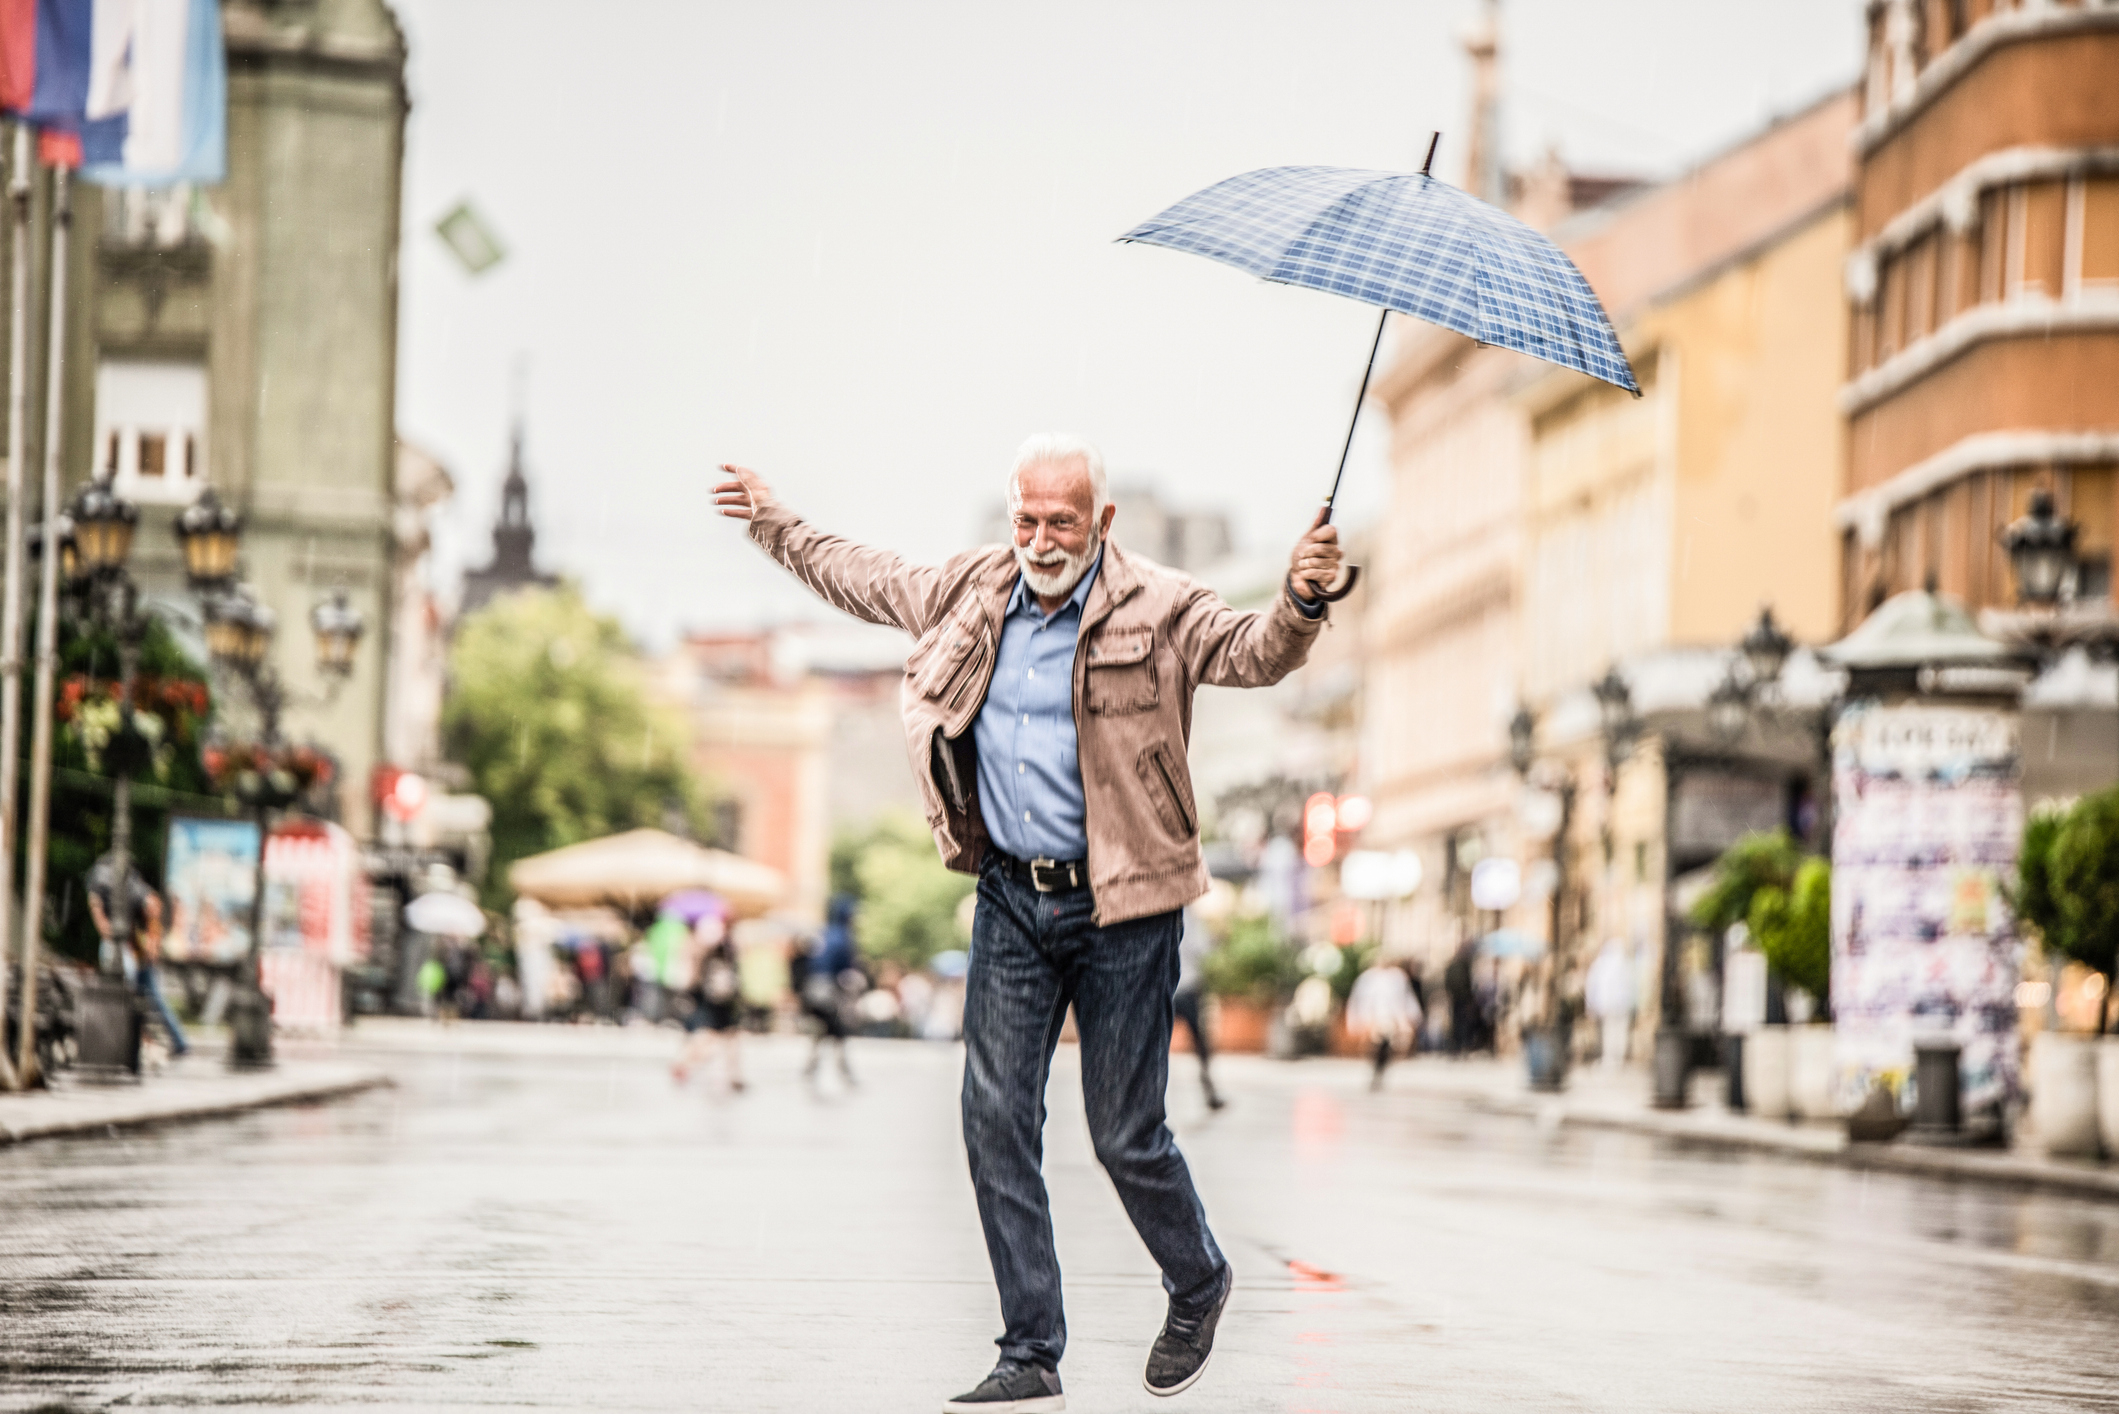 Person jubilantly holding an umbrella on a street, expressing joy